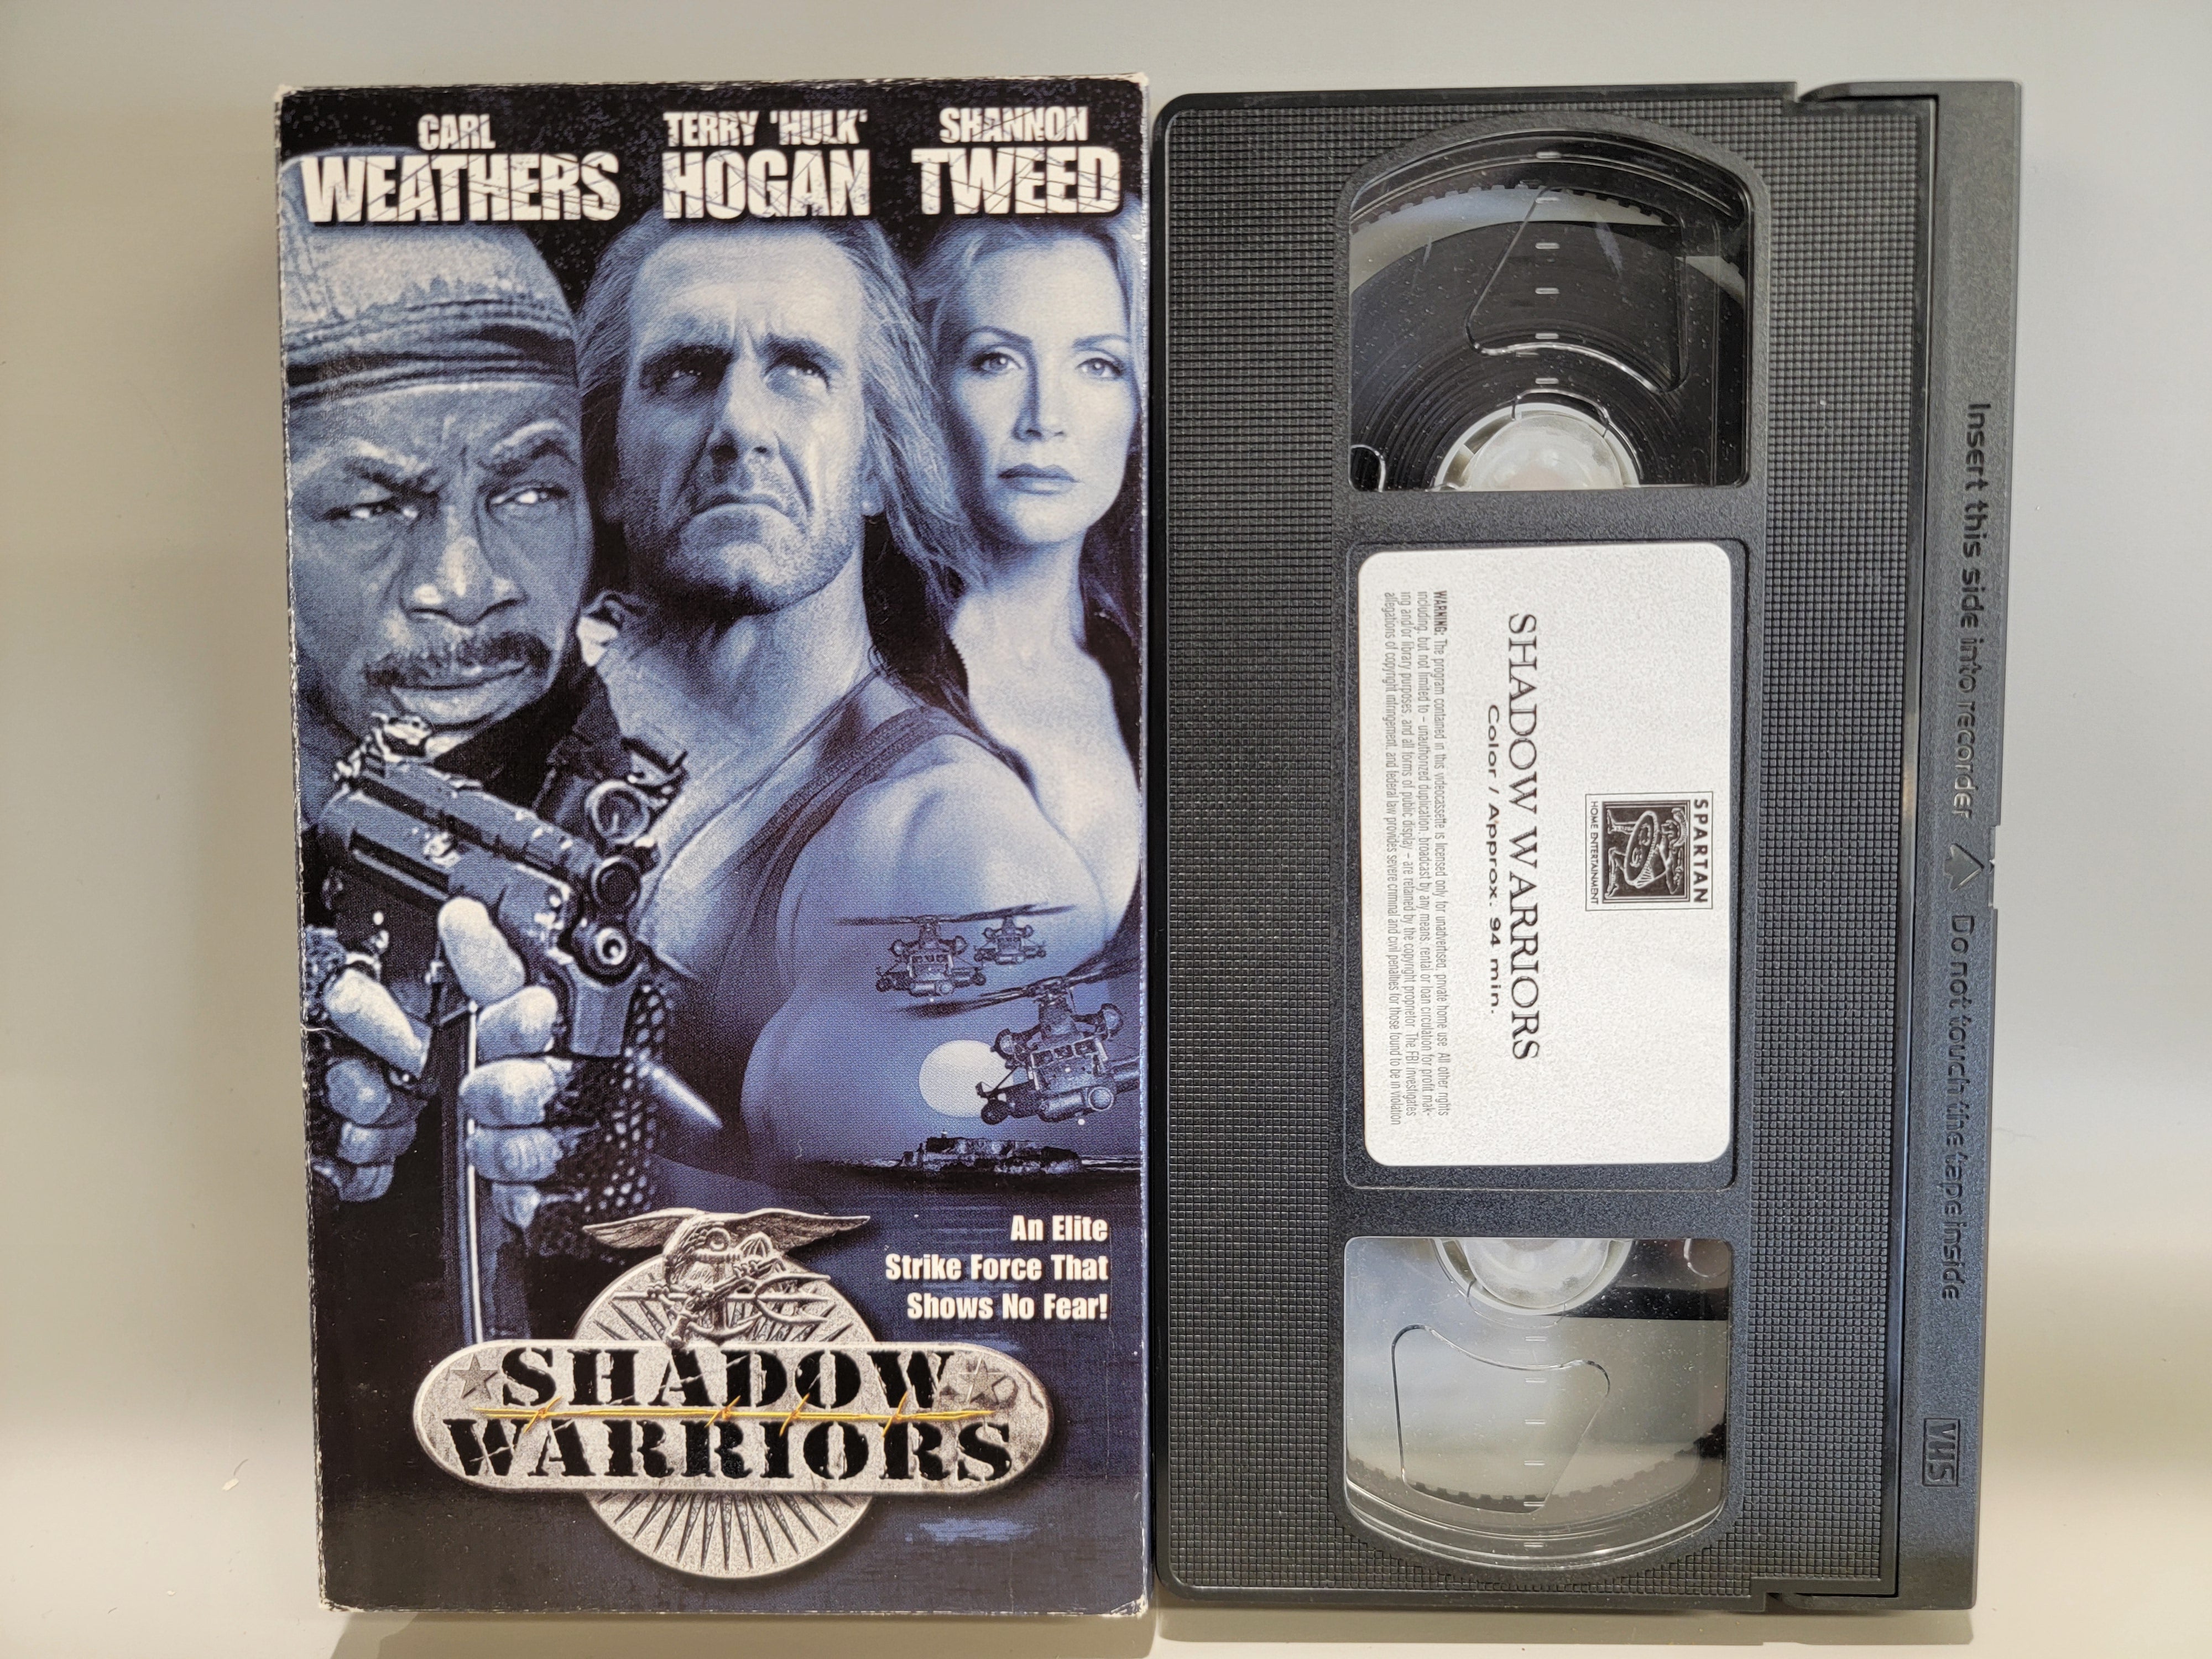 SHADOW WARRIORS VHS [USED]